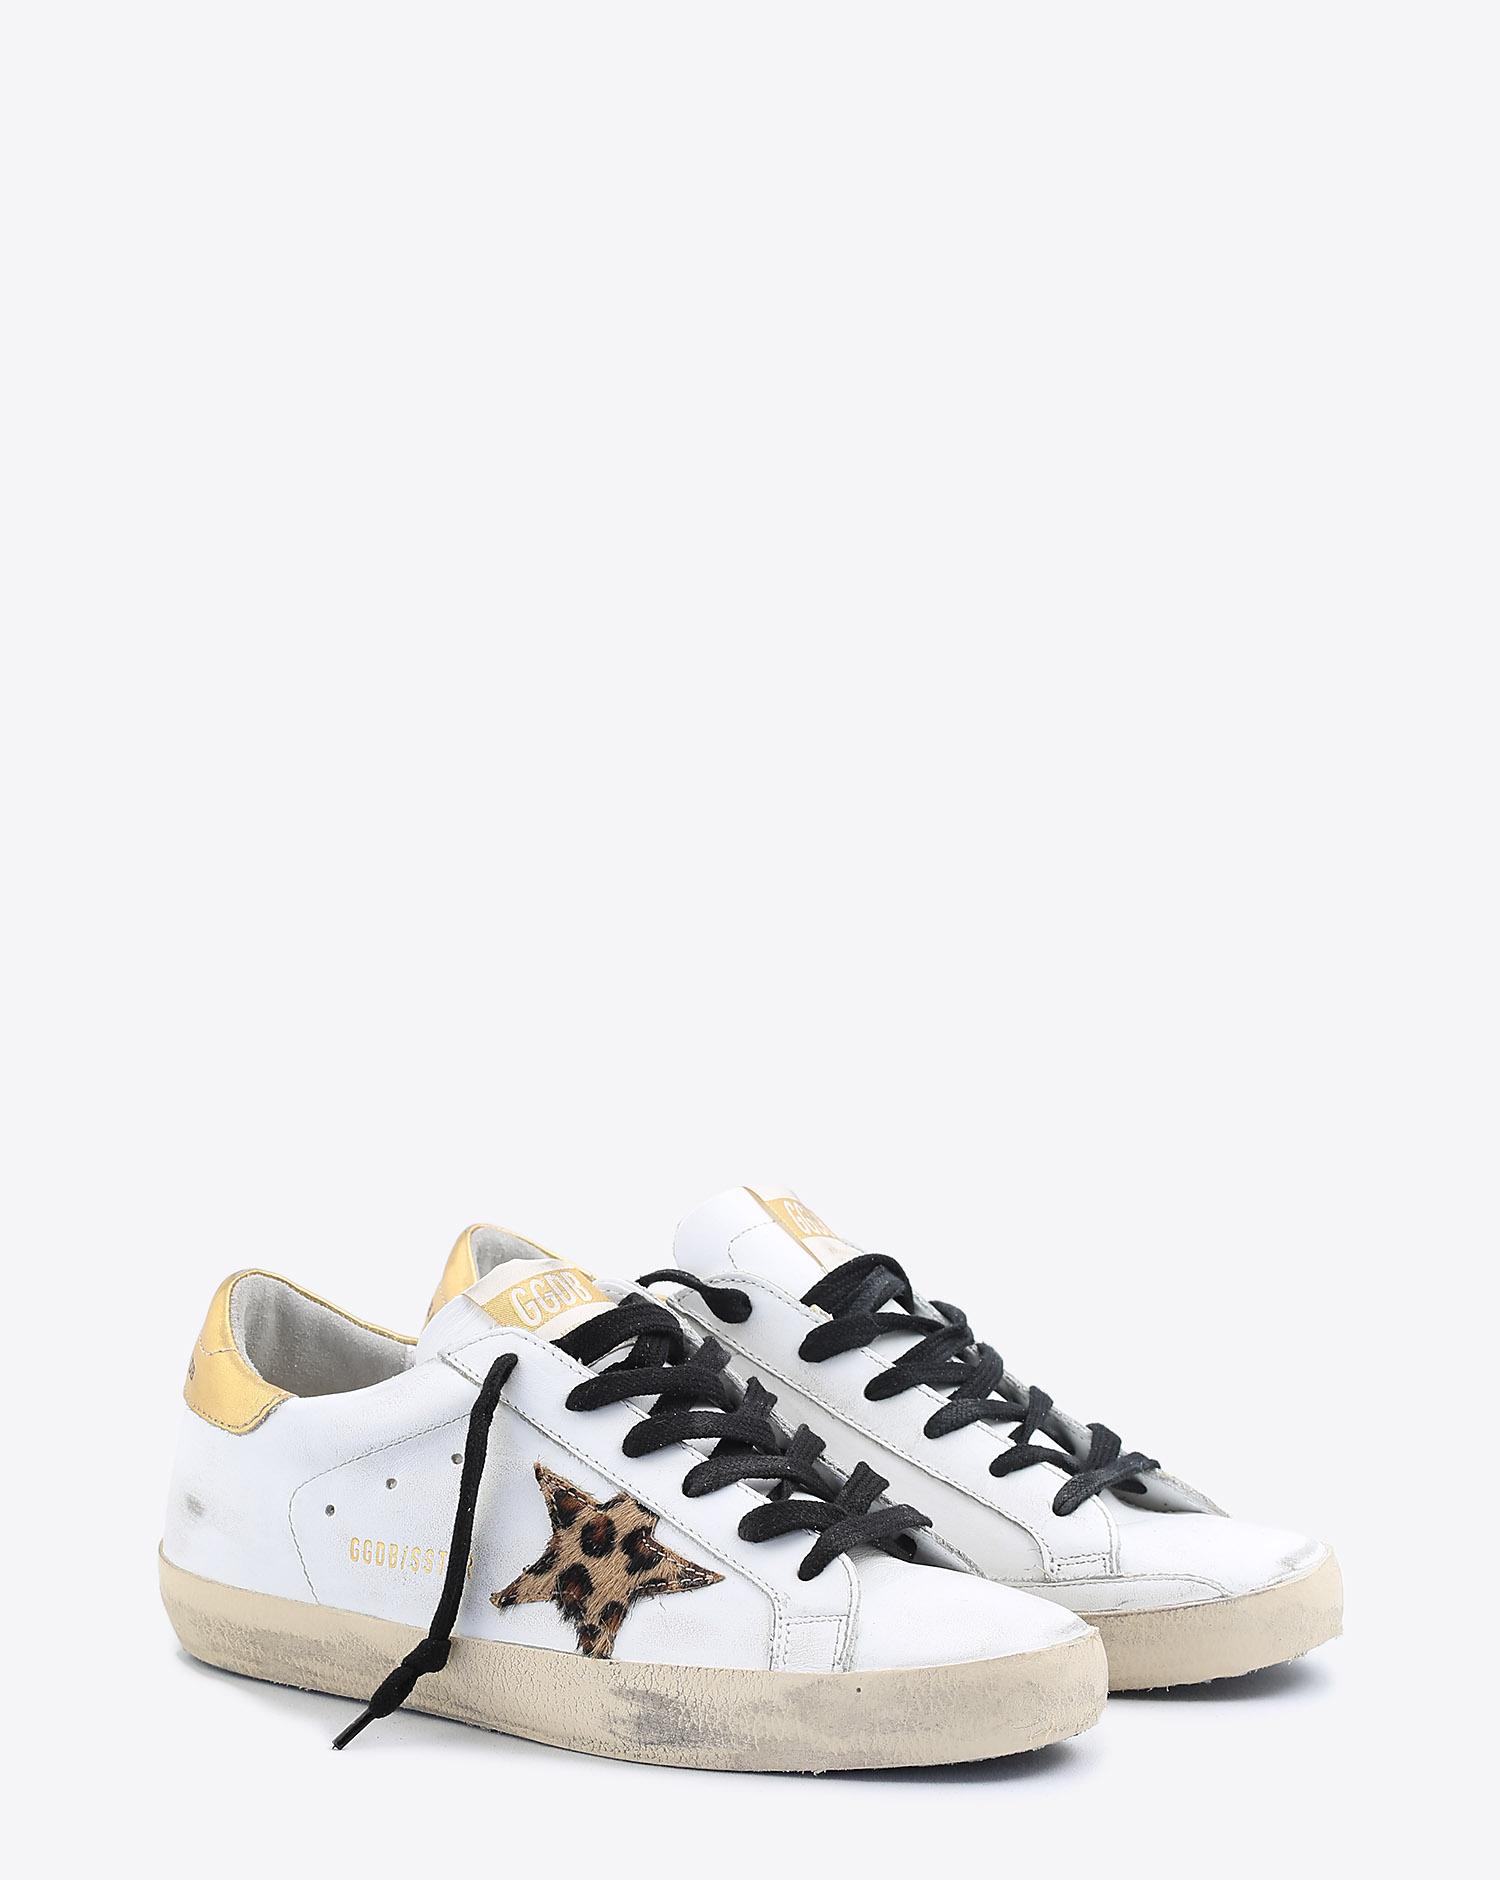 Golden Goose Woman Collection Sneakers Superstar - White Leather - Gold - Leopard Star  